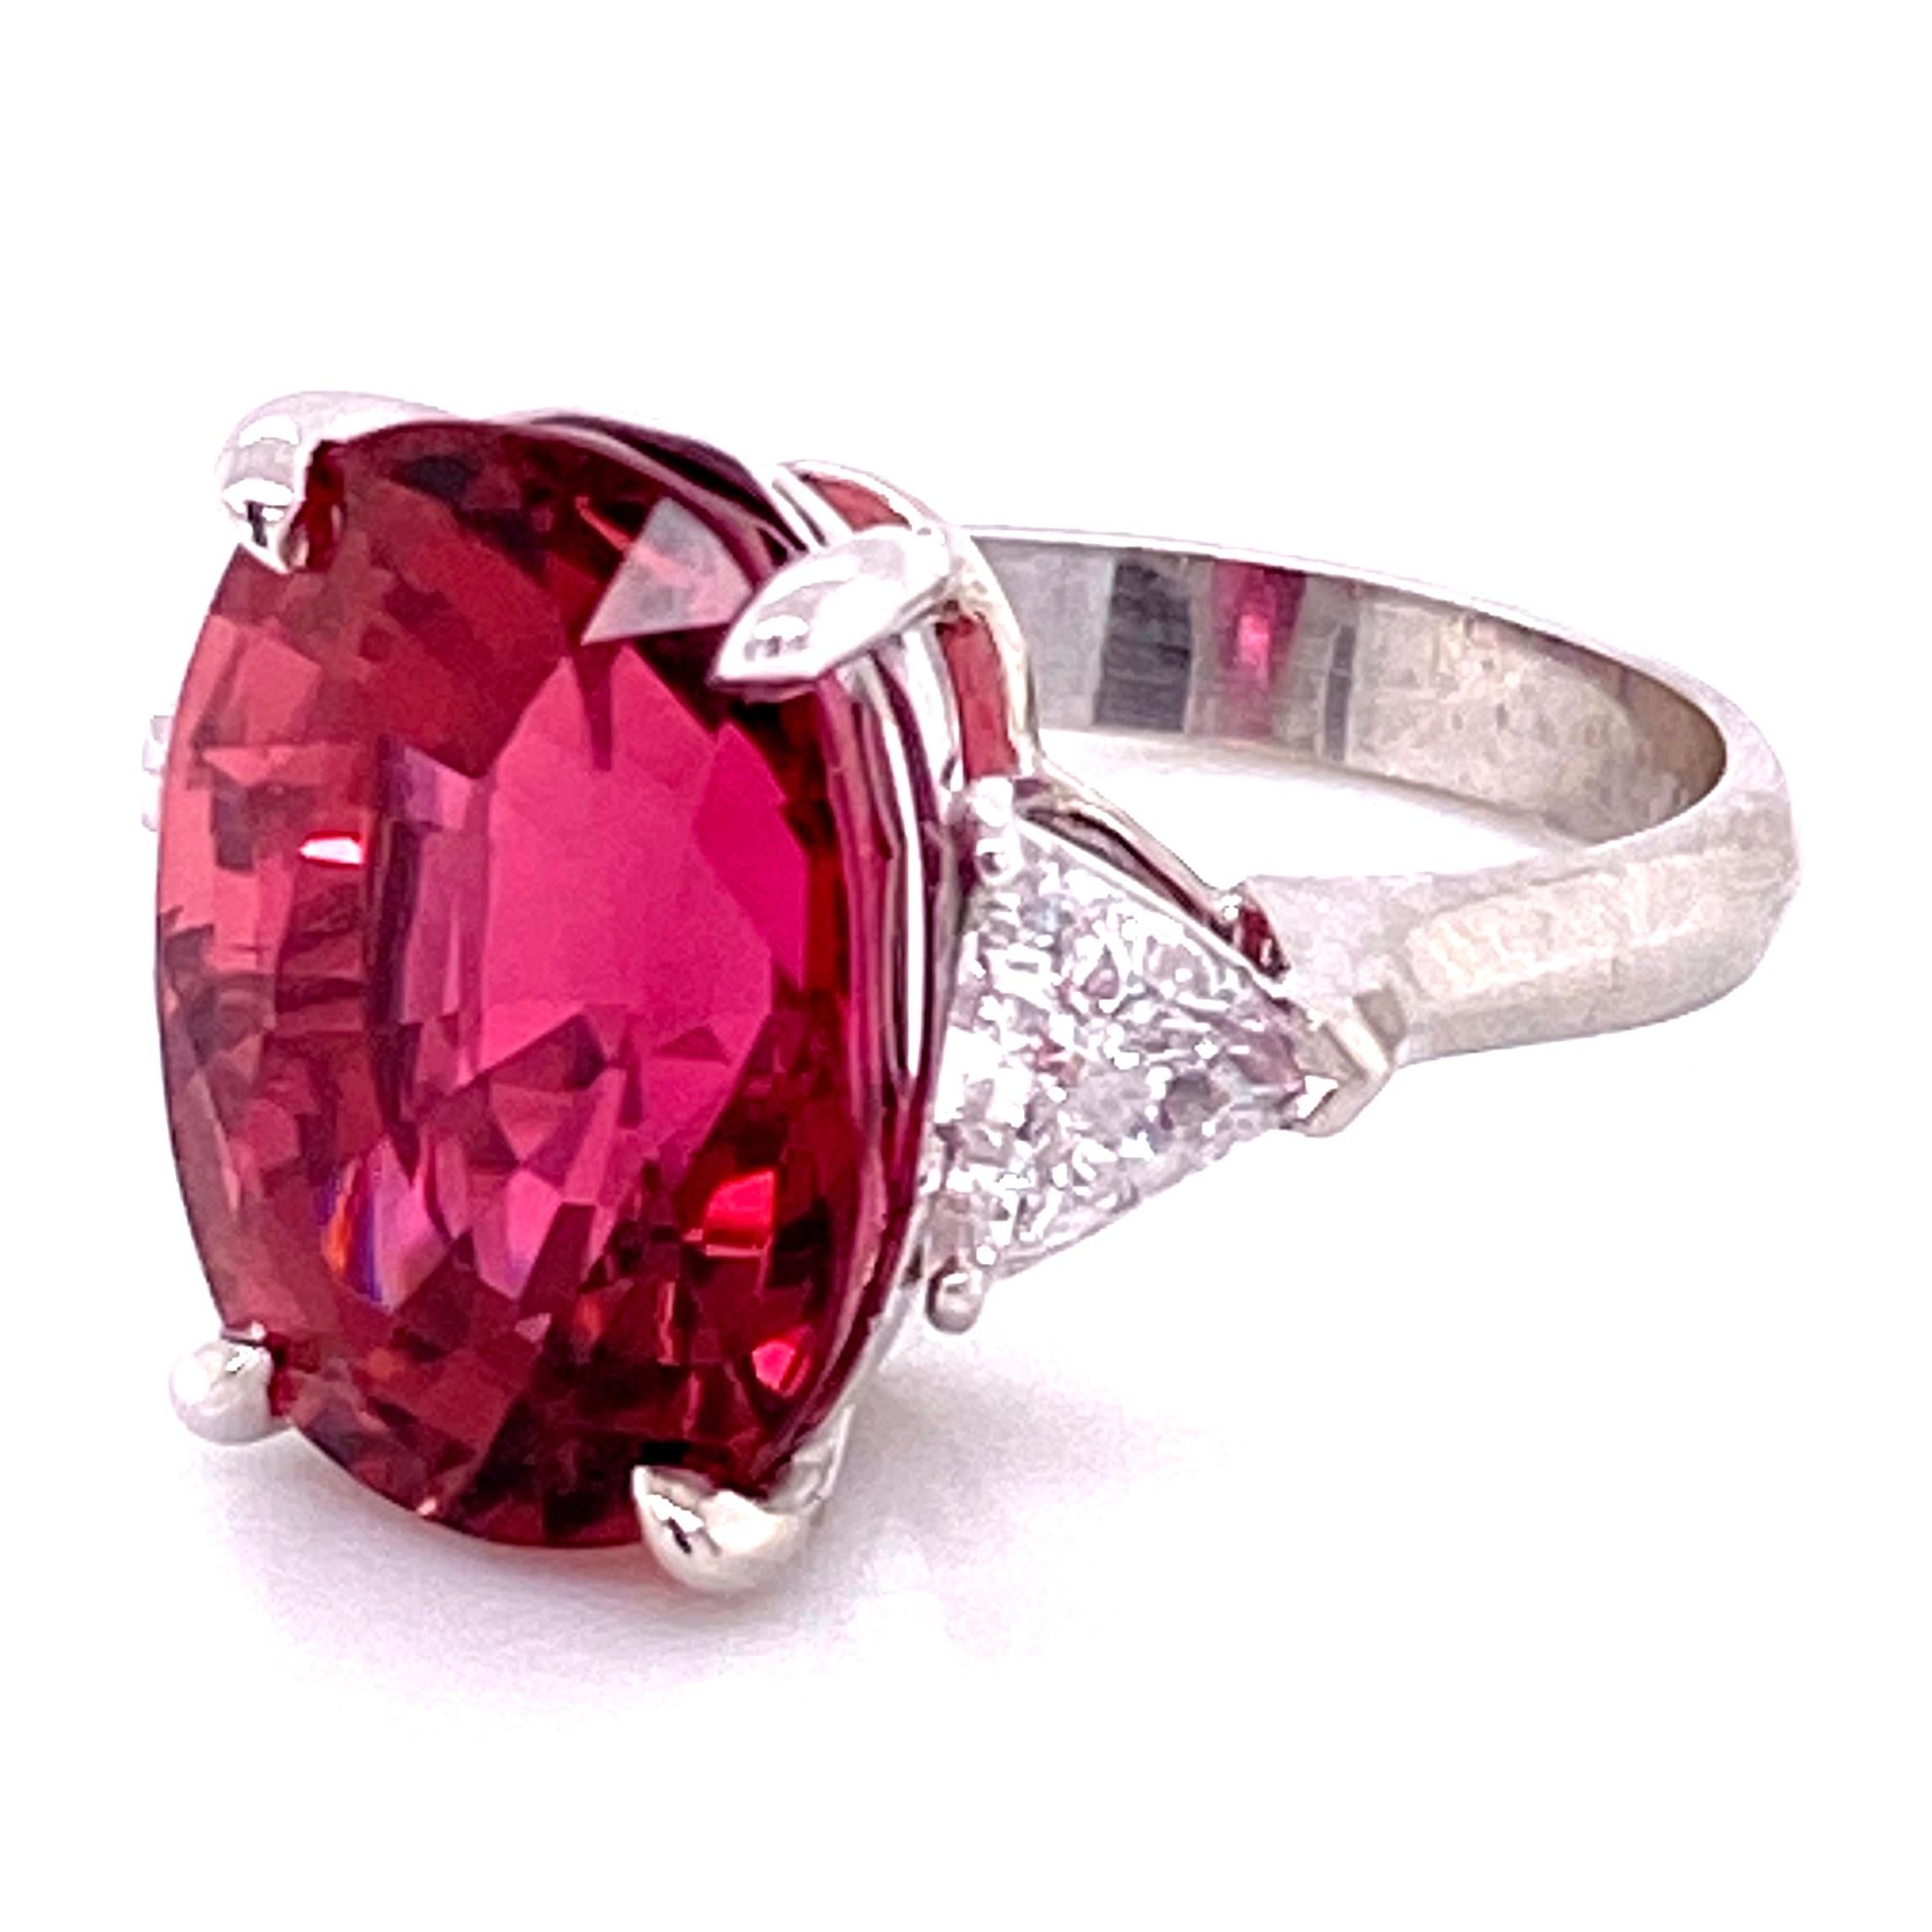 11.31 Carat Rubelite Tourmaline and Diamond Platinum Ring Estate Fine Jewelry In Excellent Condition For Sale In Montreal, QC